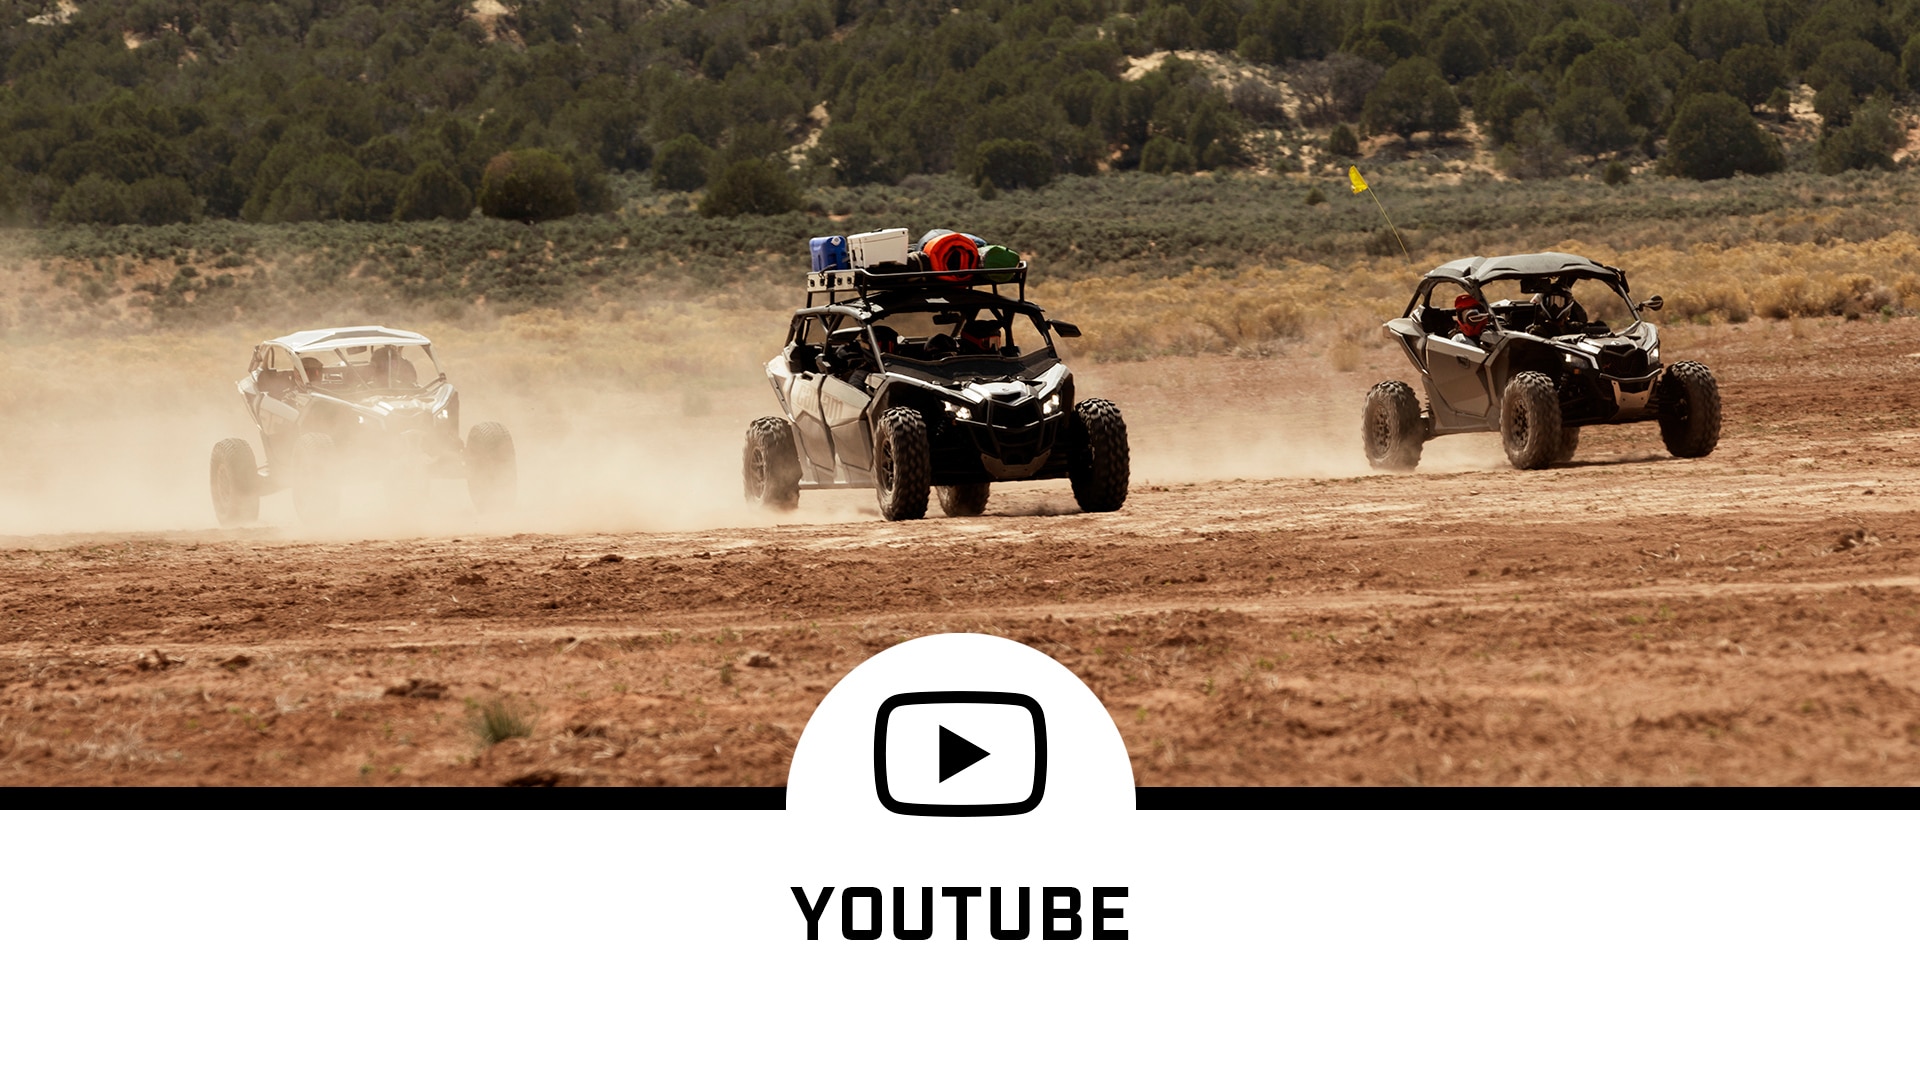 Three Can-Am vehicles on a patch of dirt and a YouTube social media logo